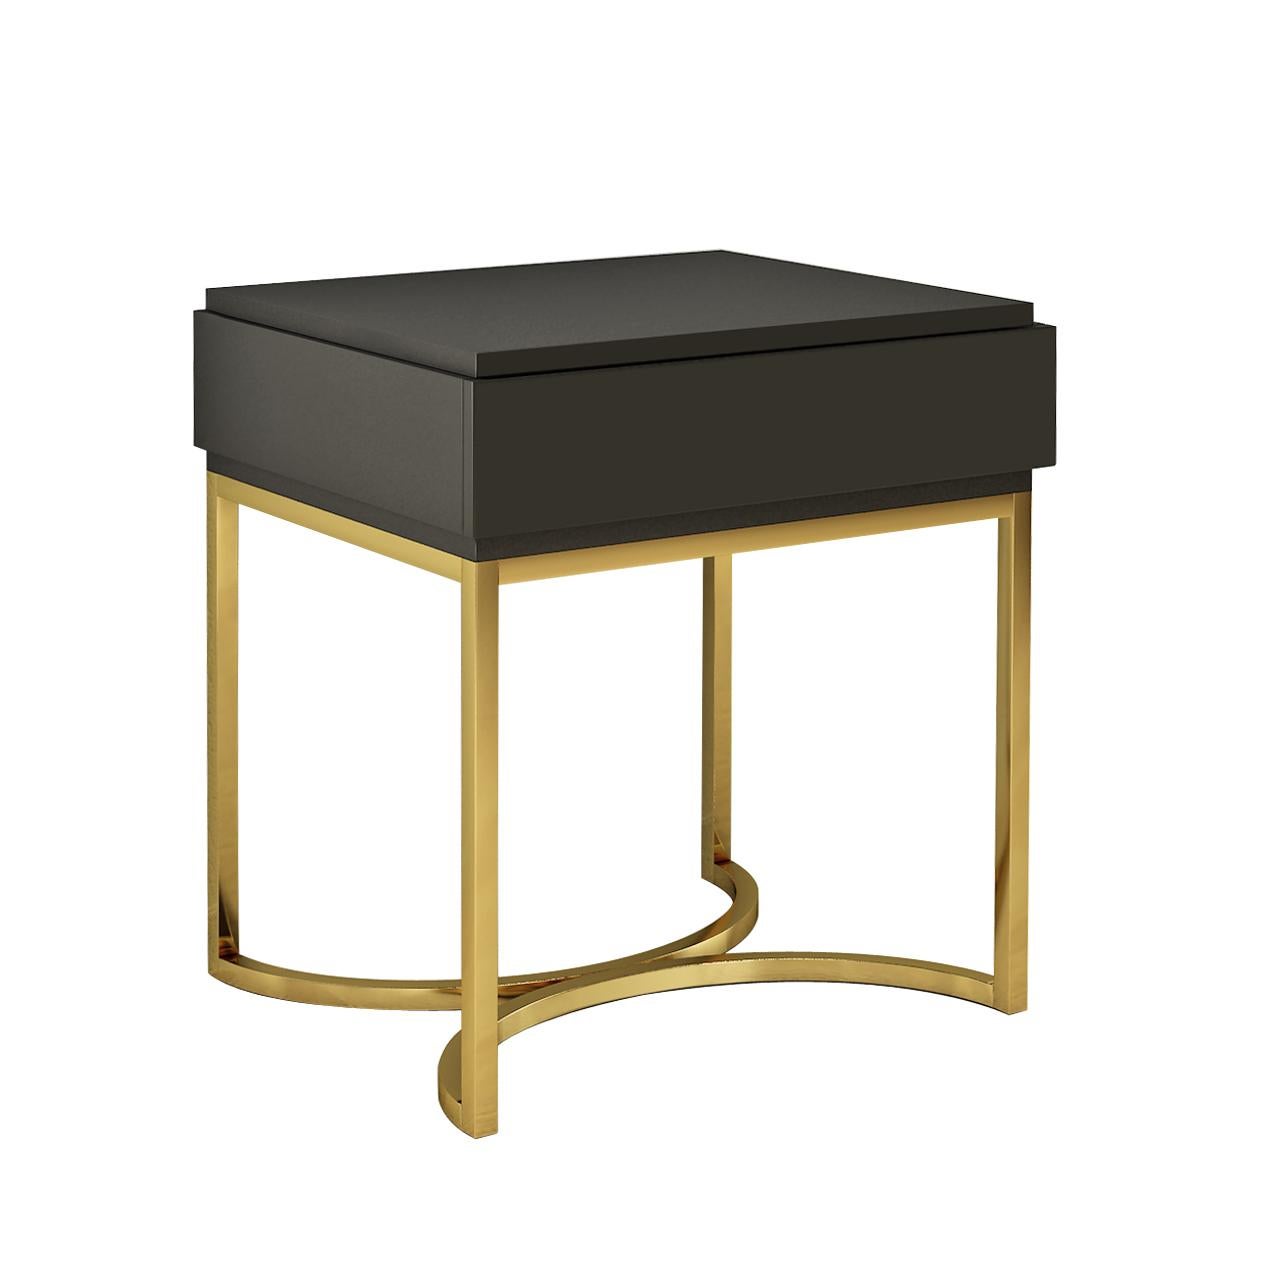 Designed by IC and realized by skillful Italian artisans, the Damiano nightstand features one self-closing drawer standing on a brass, or powder-coated metal – structure. It is a stand-out piece that will enrich any decor with sophisticated